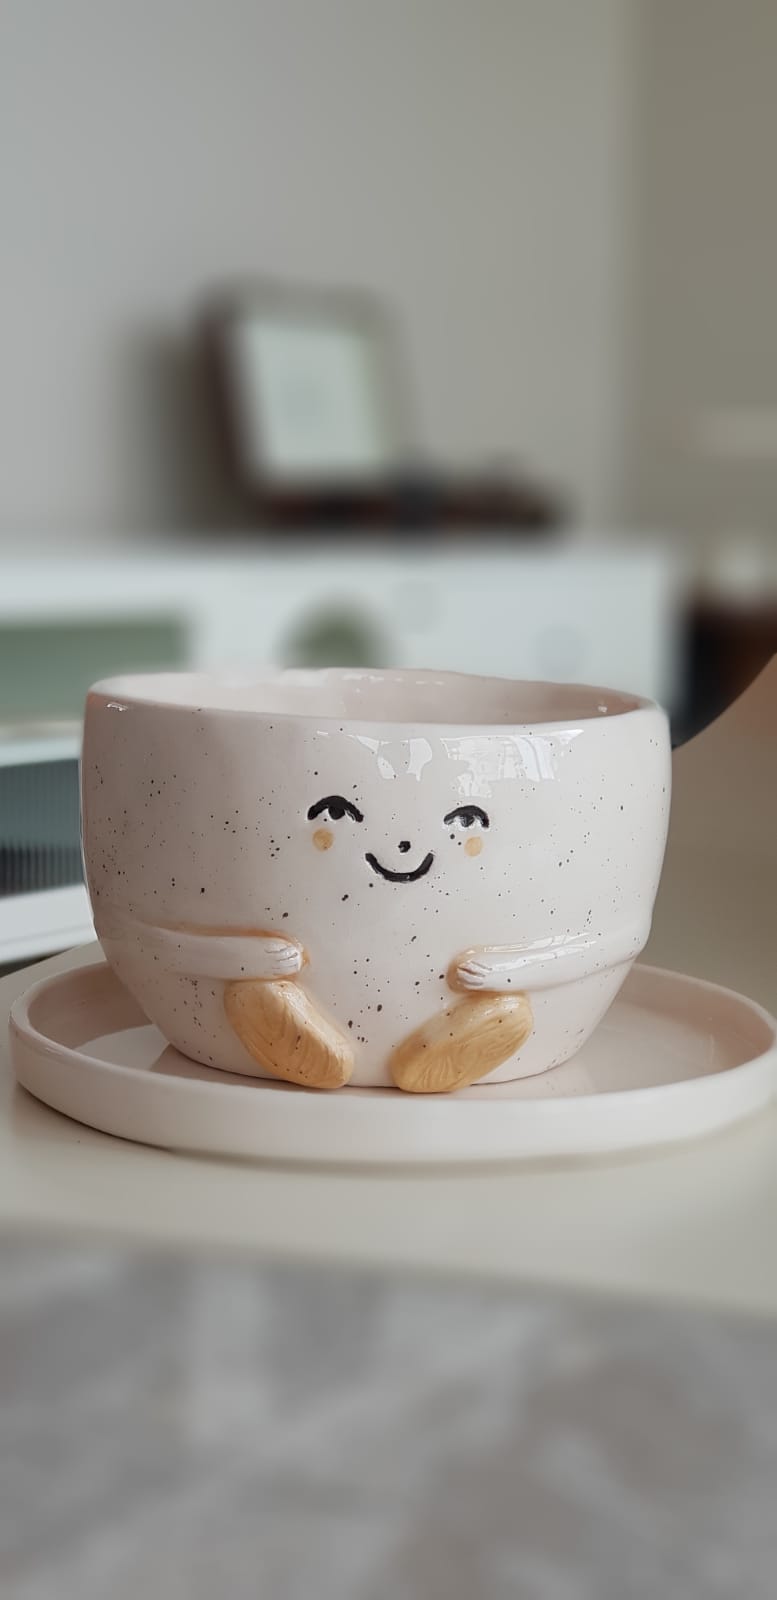 Smiling ceramic planter with arms gently resting on a matching saucer.